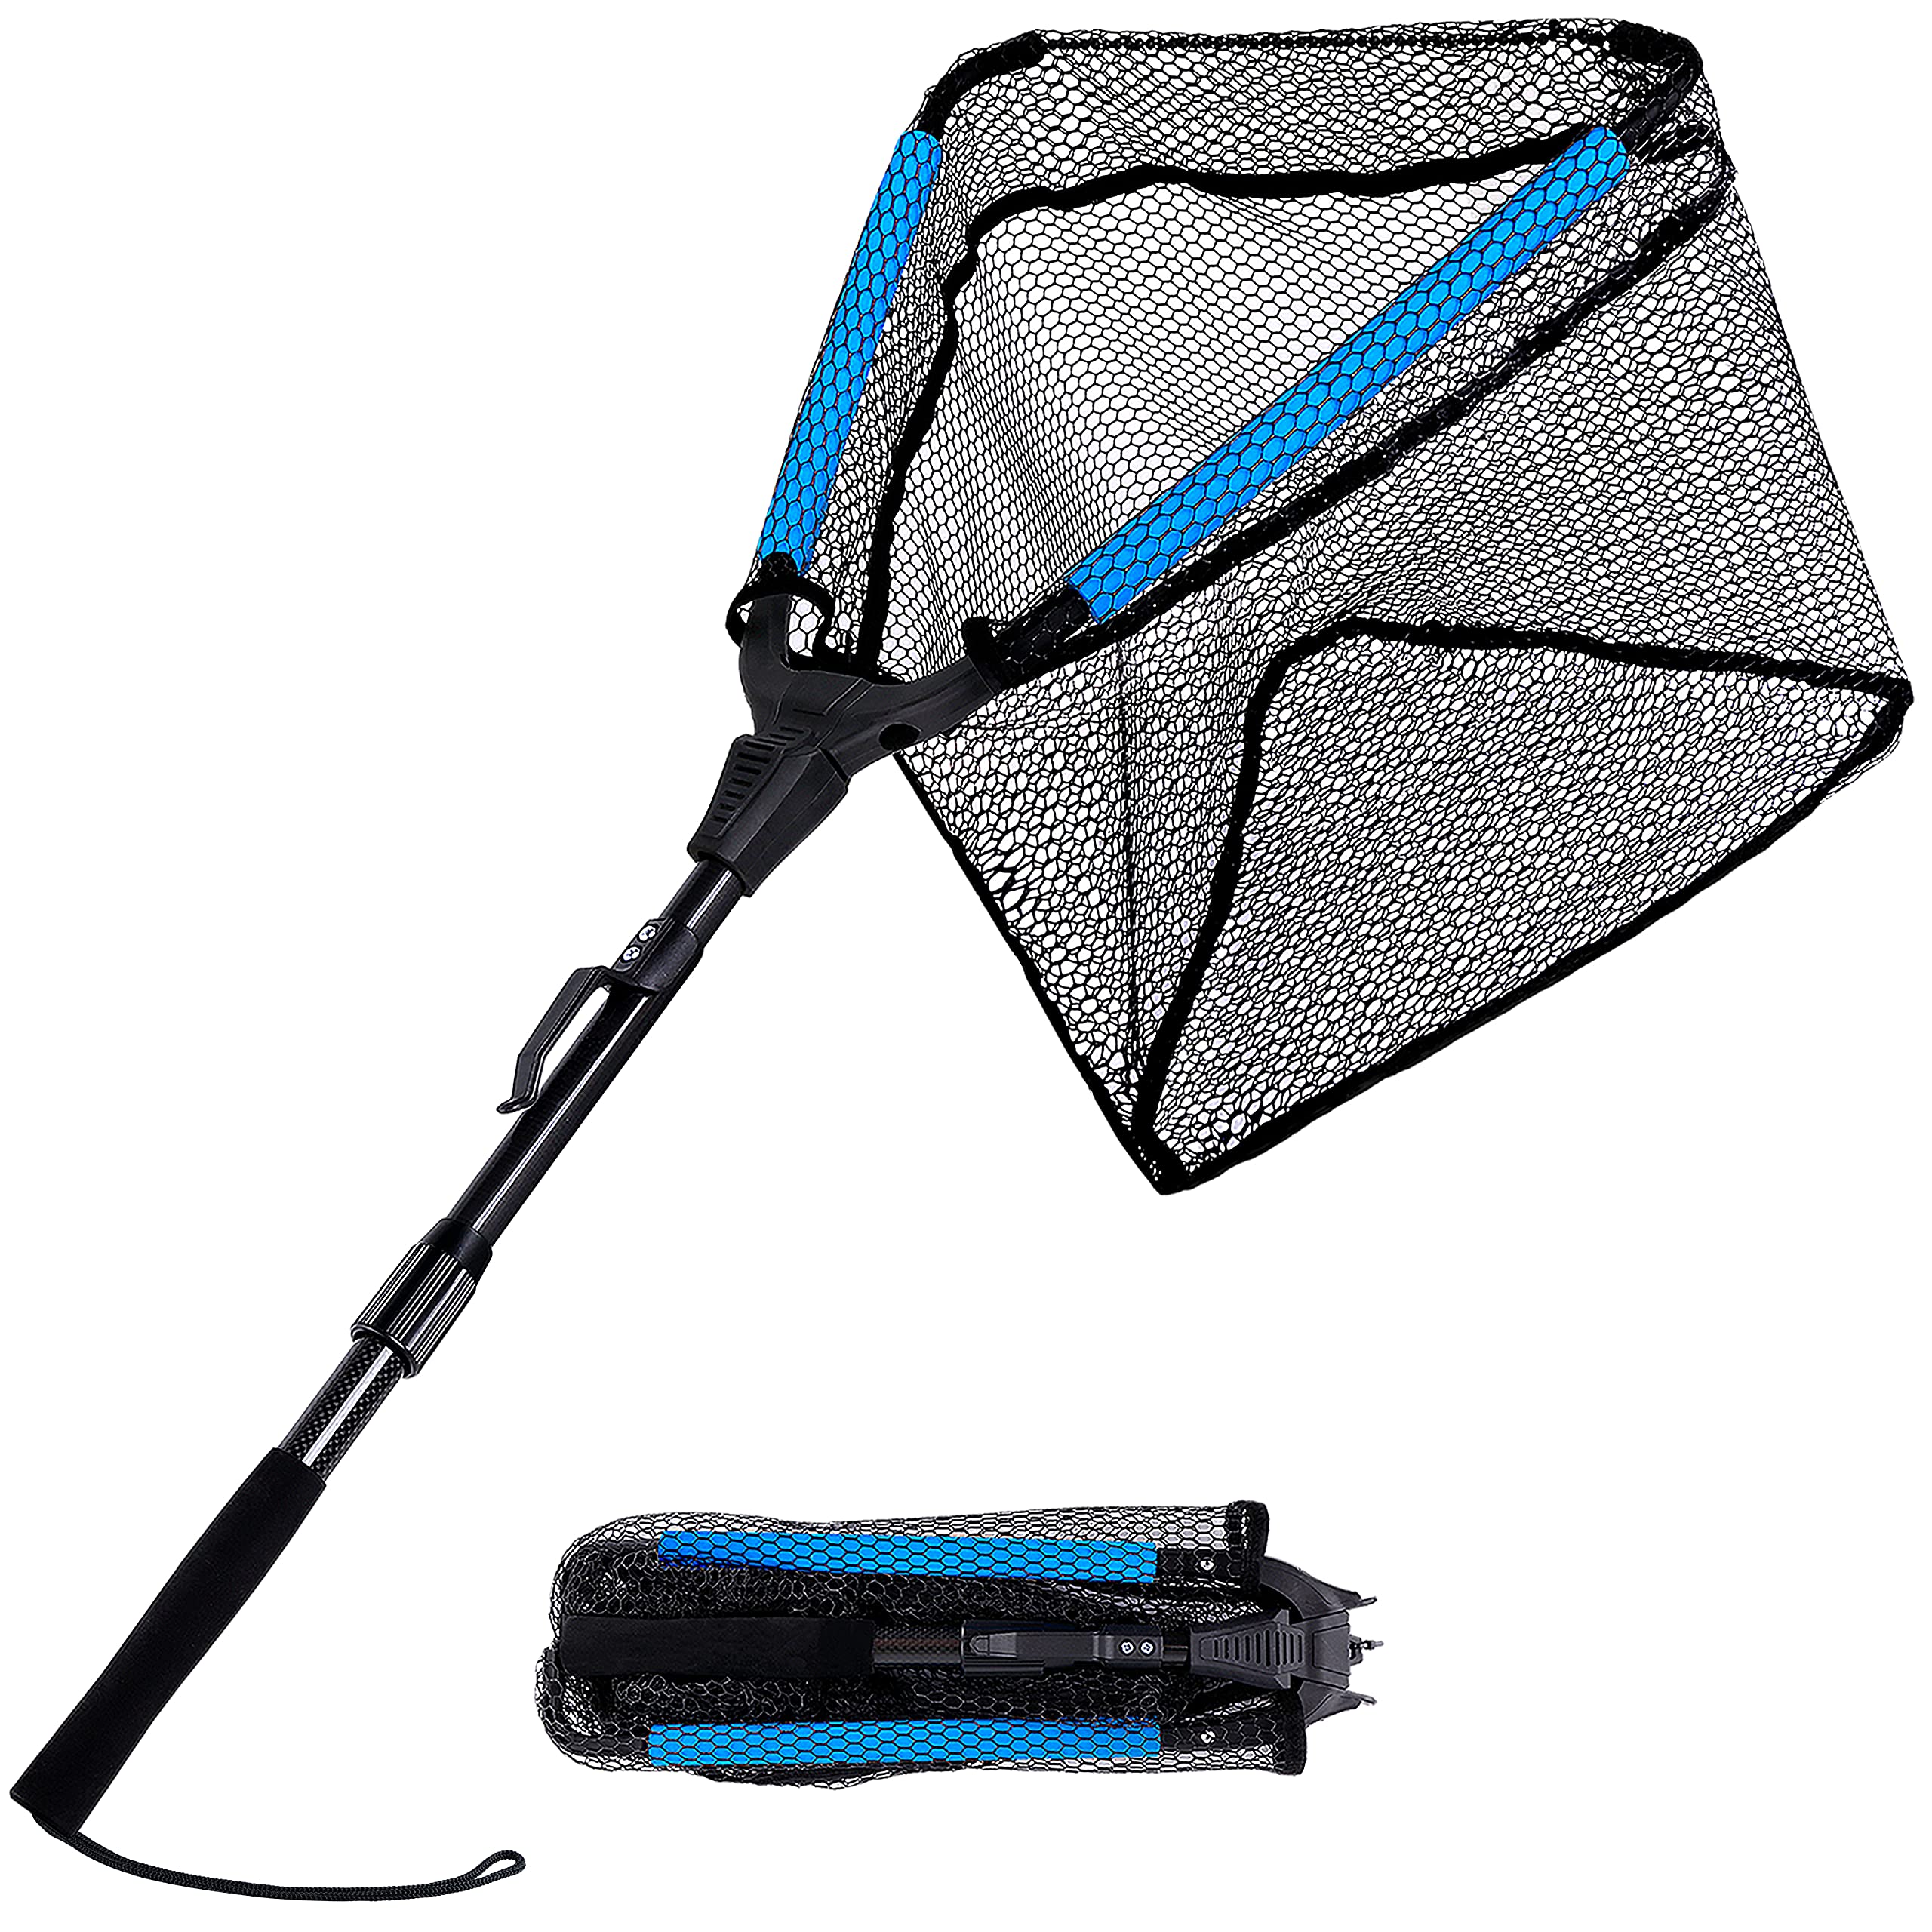 PLUSINNO Fishing Net Fish Landing Net, Foldable Collapsible Telescopic Pole  Handle, Durable Nylon Material Mesh, Safe Fish Catching or Releasing